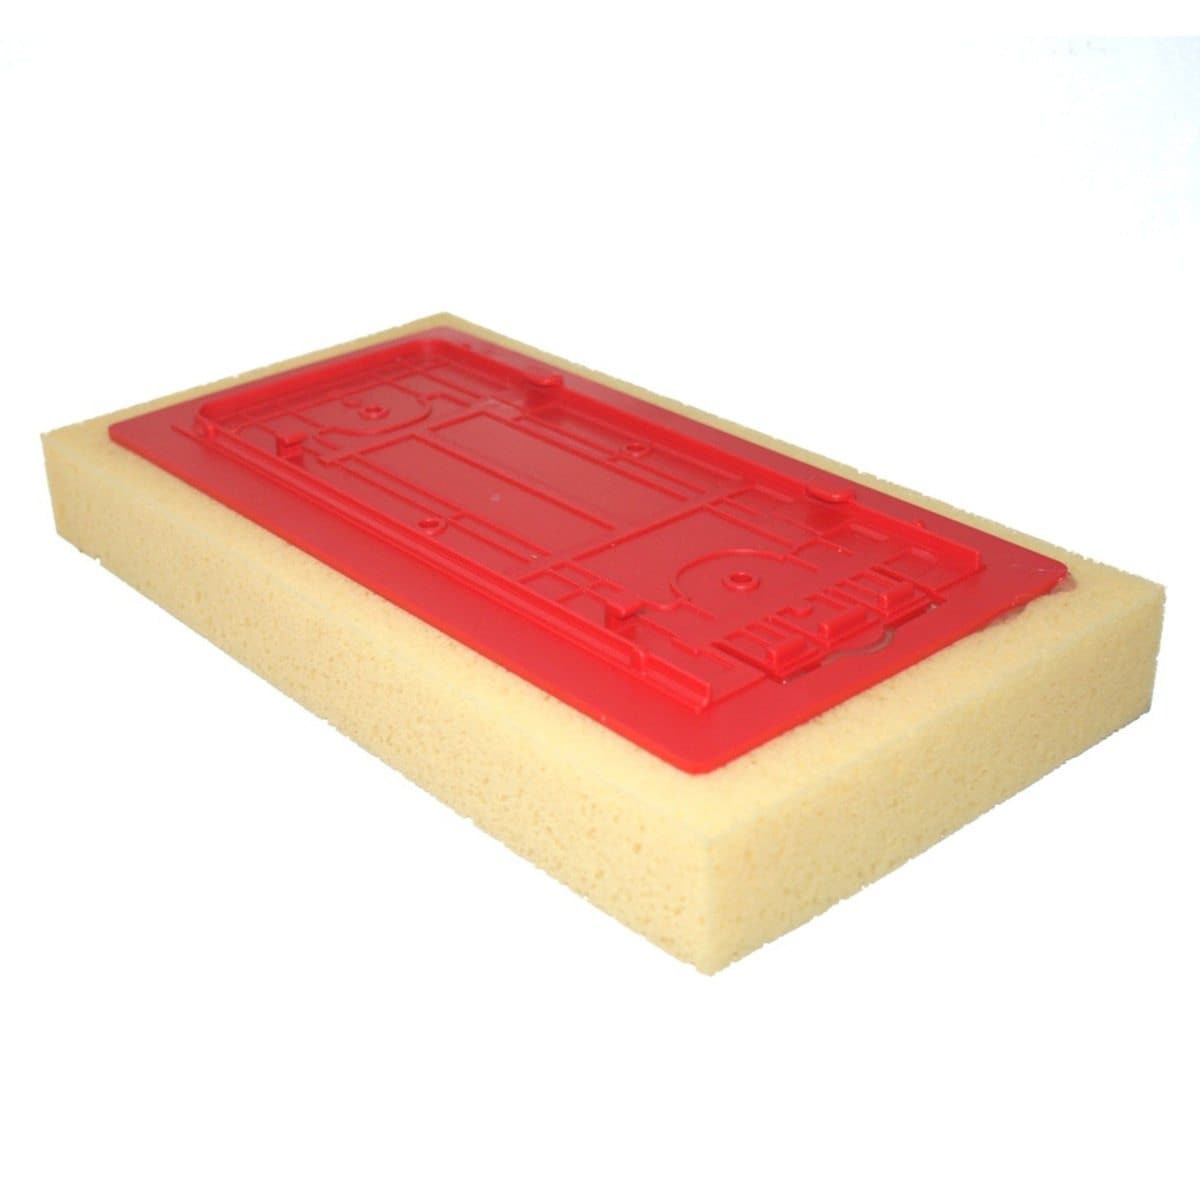 RTC Products Extra-Large Hydrophilic Grecian Grouting Sponges - 25pc